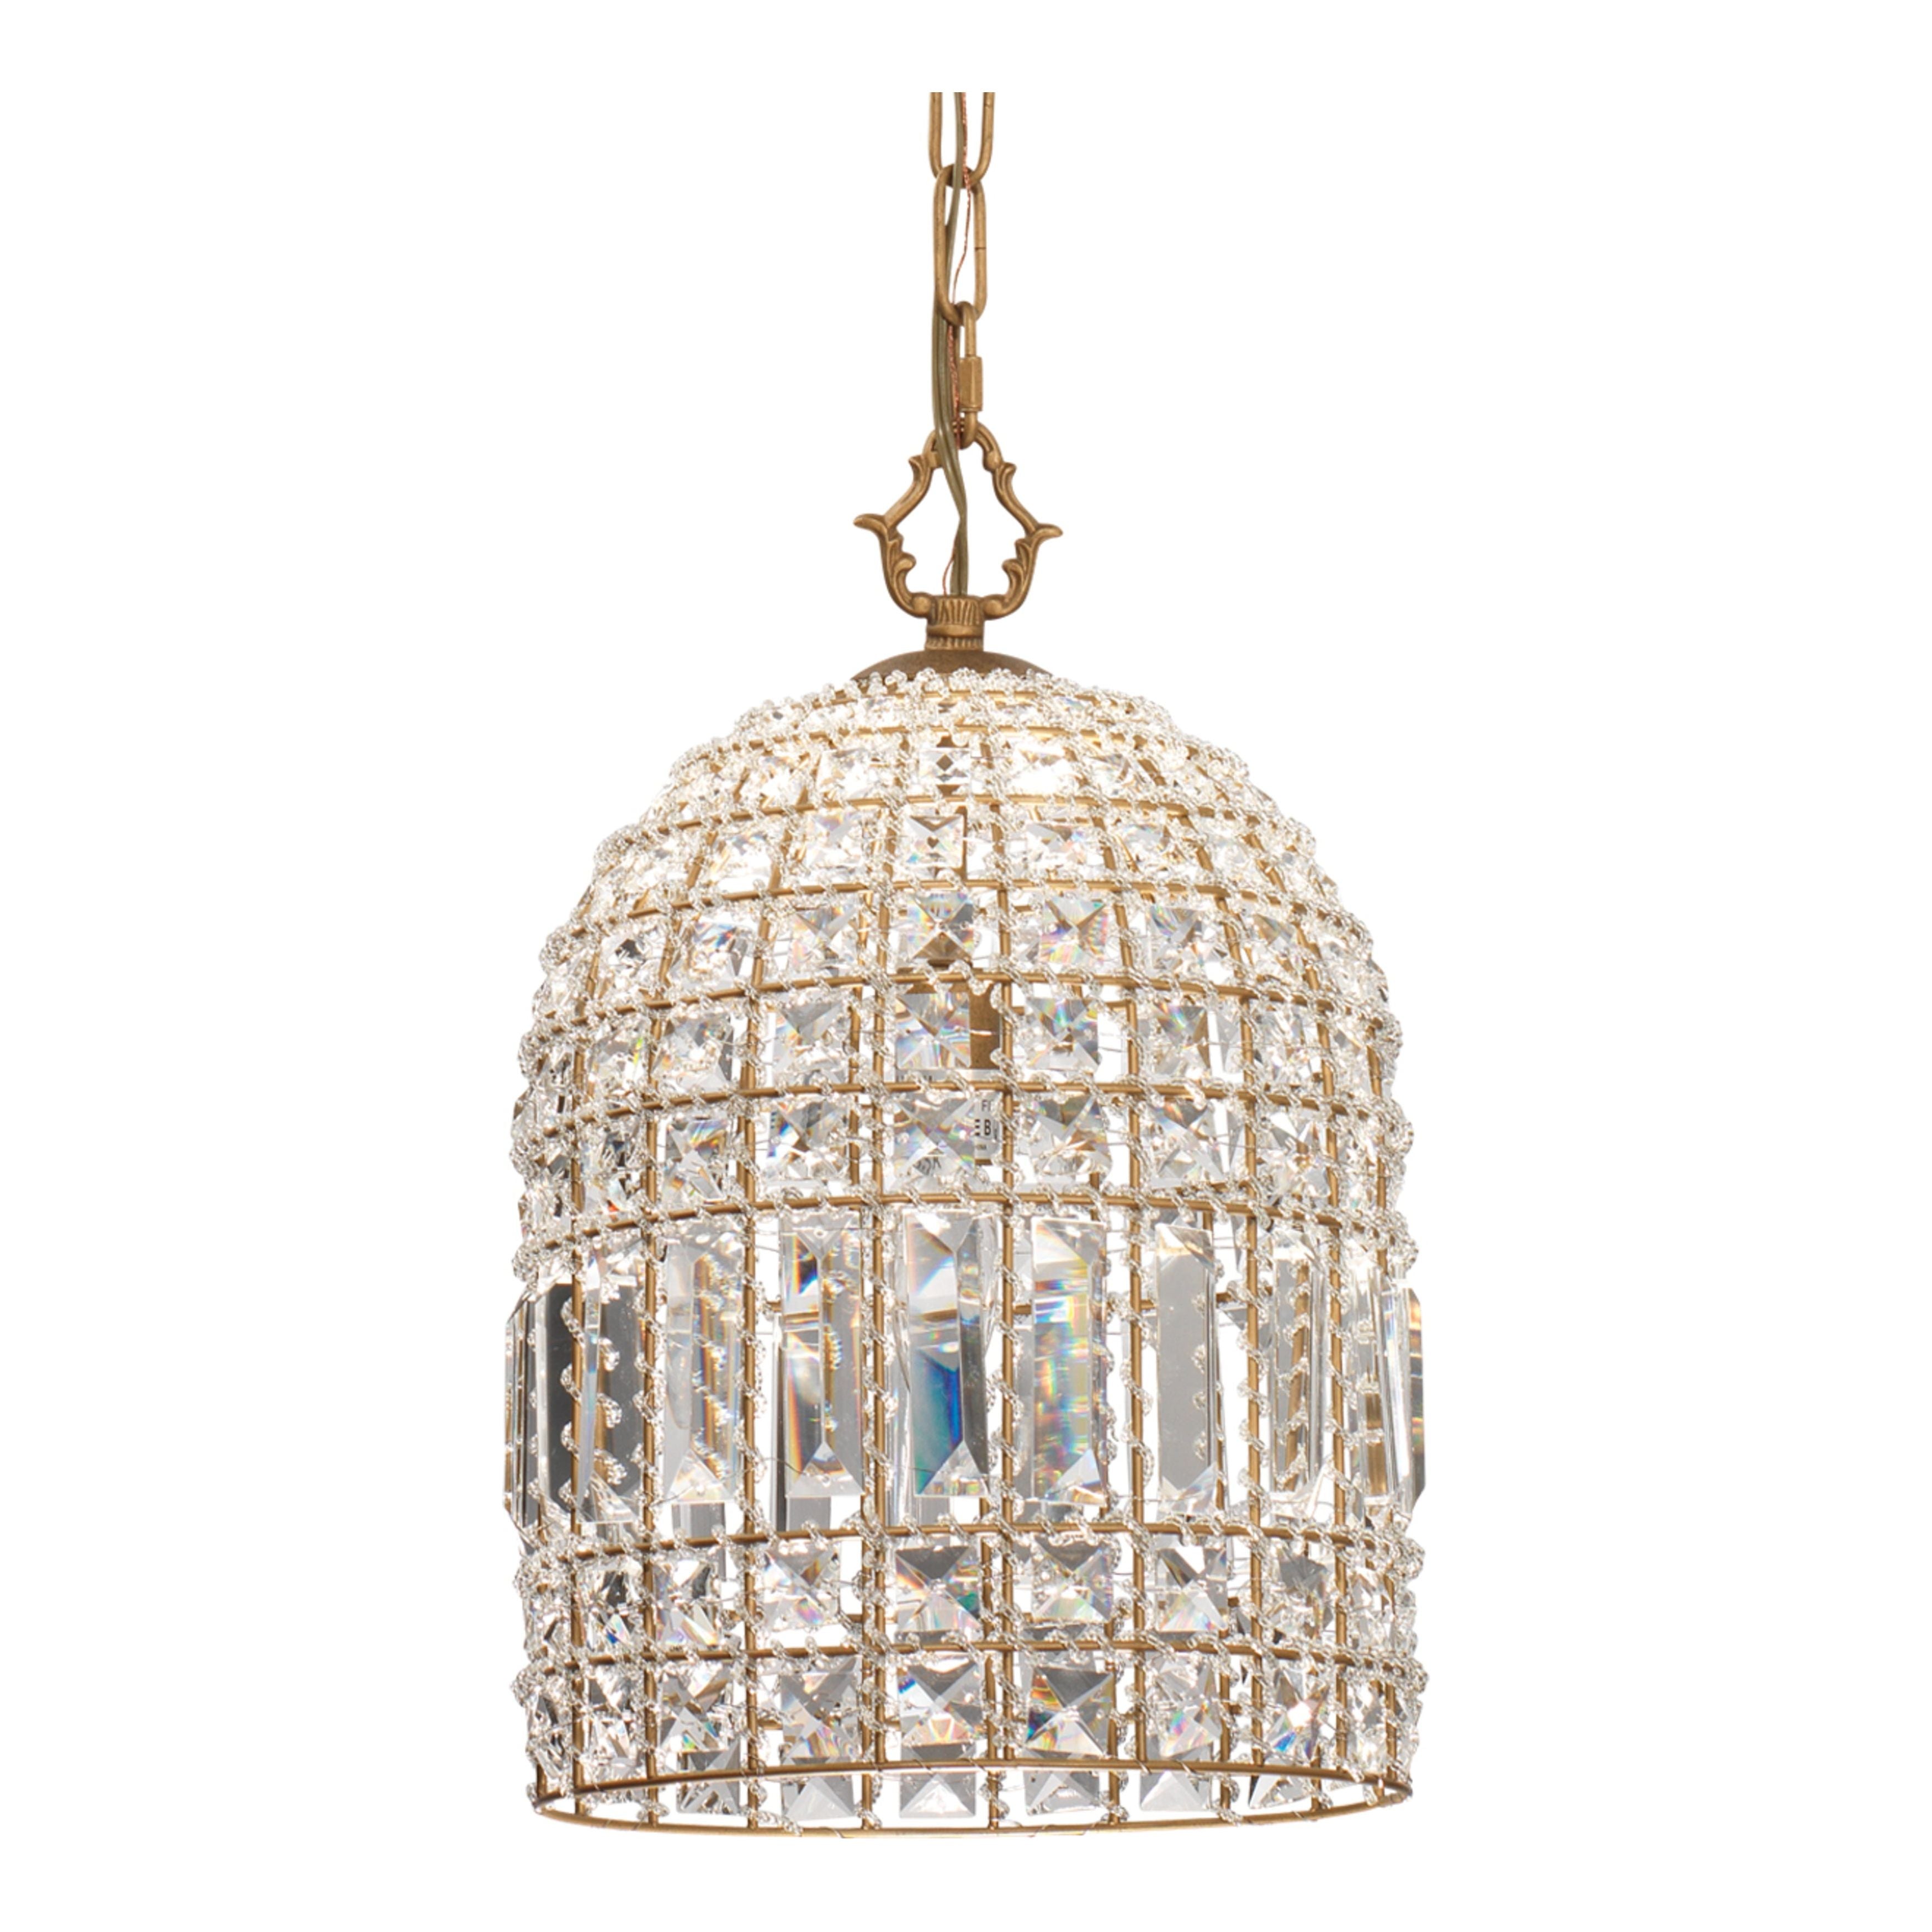 Jamie Young Company - CH14 - Crystal Pendant Chandelier - Crystal - Gold